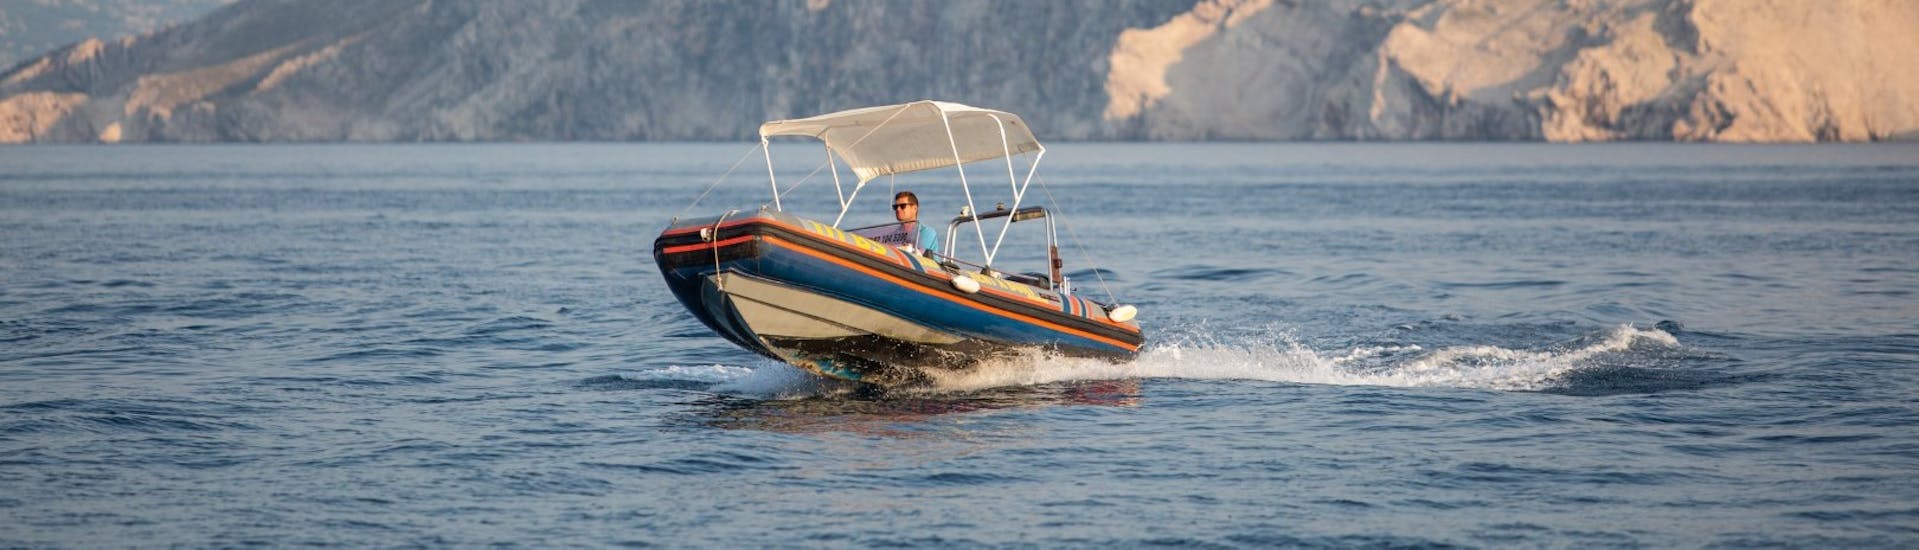 Man enjoying the Marlin 480 boat, from King Rent a Boat and Semi-Submarine.